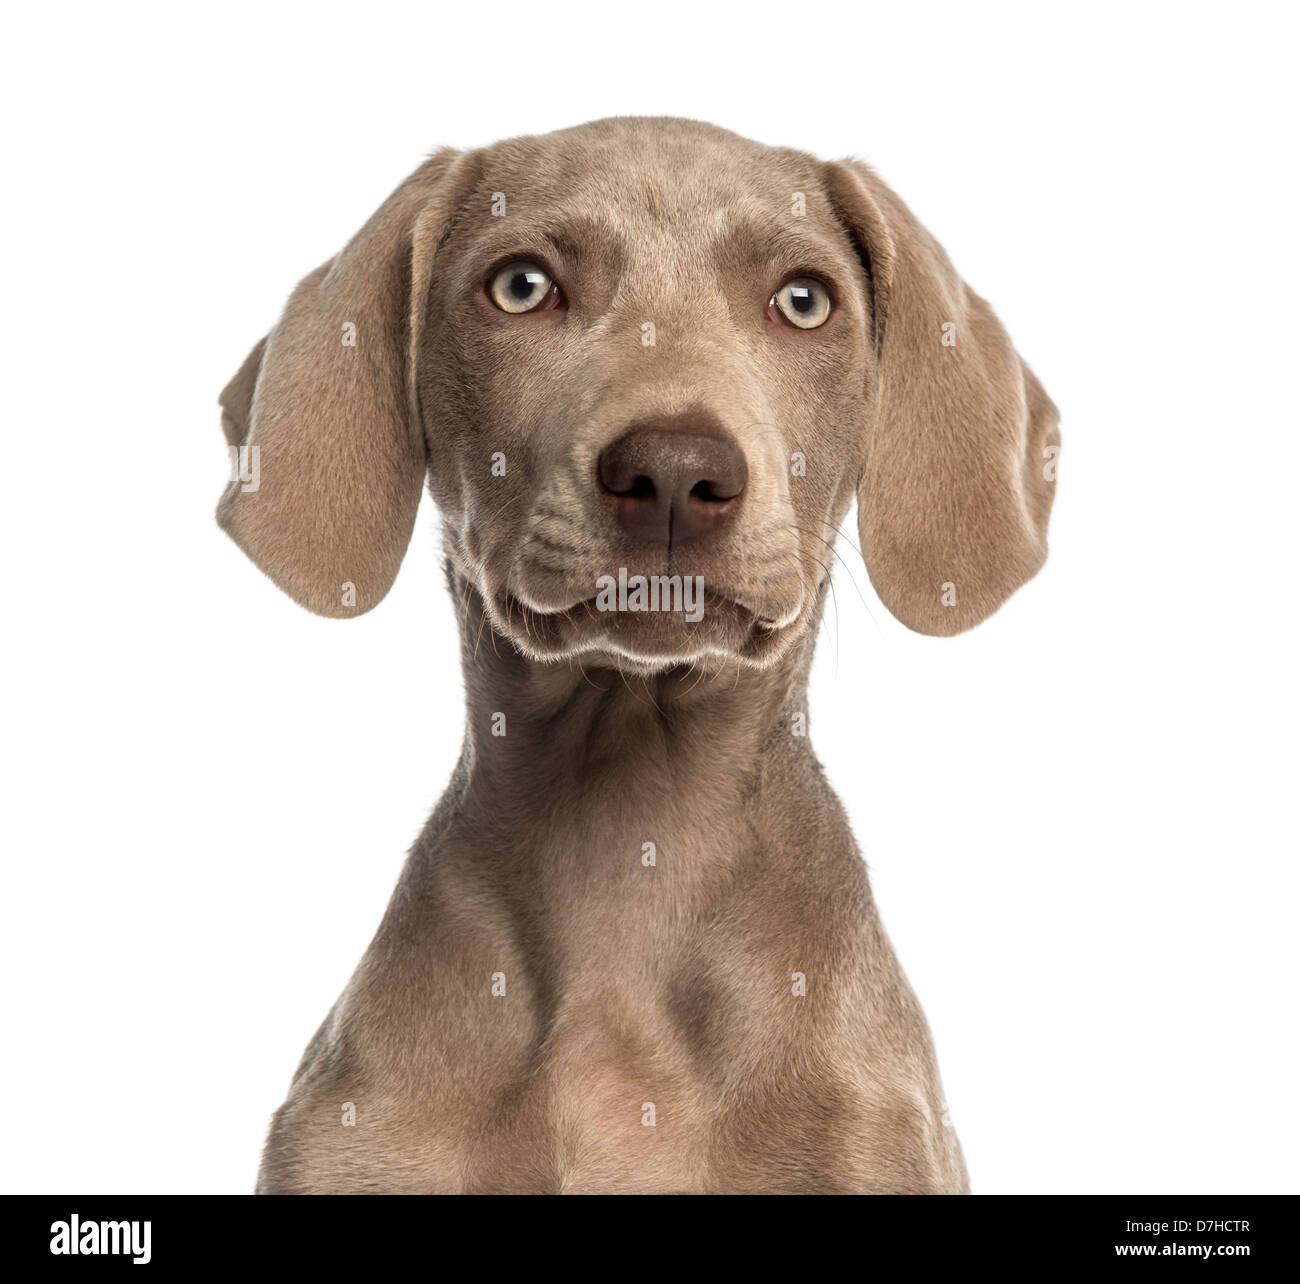 Close-up of a Weimaraner puppy, 2.5 months old, against white background Stock Photo